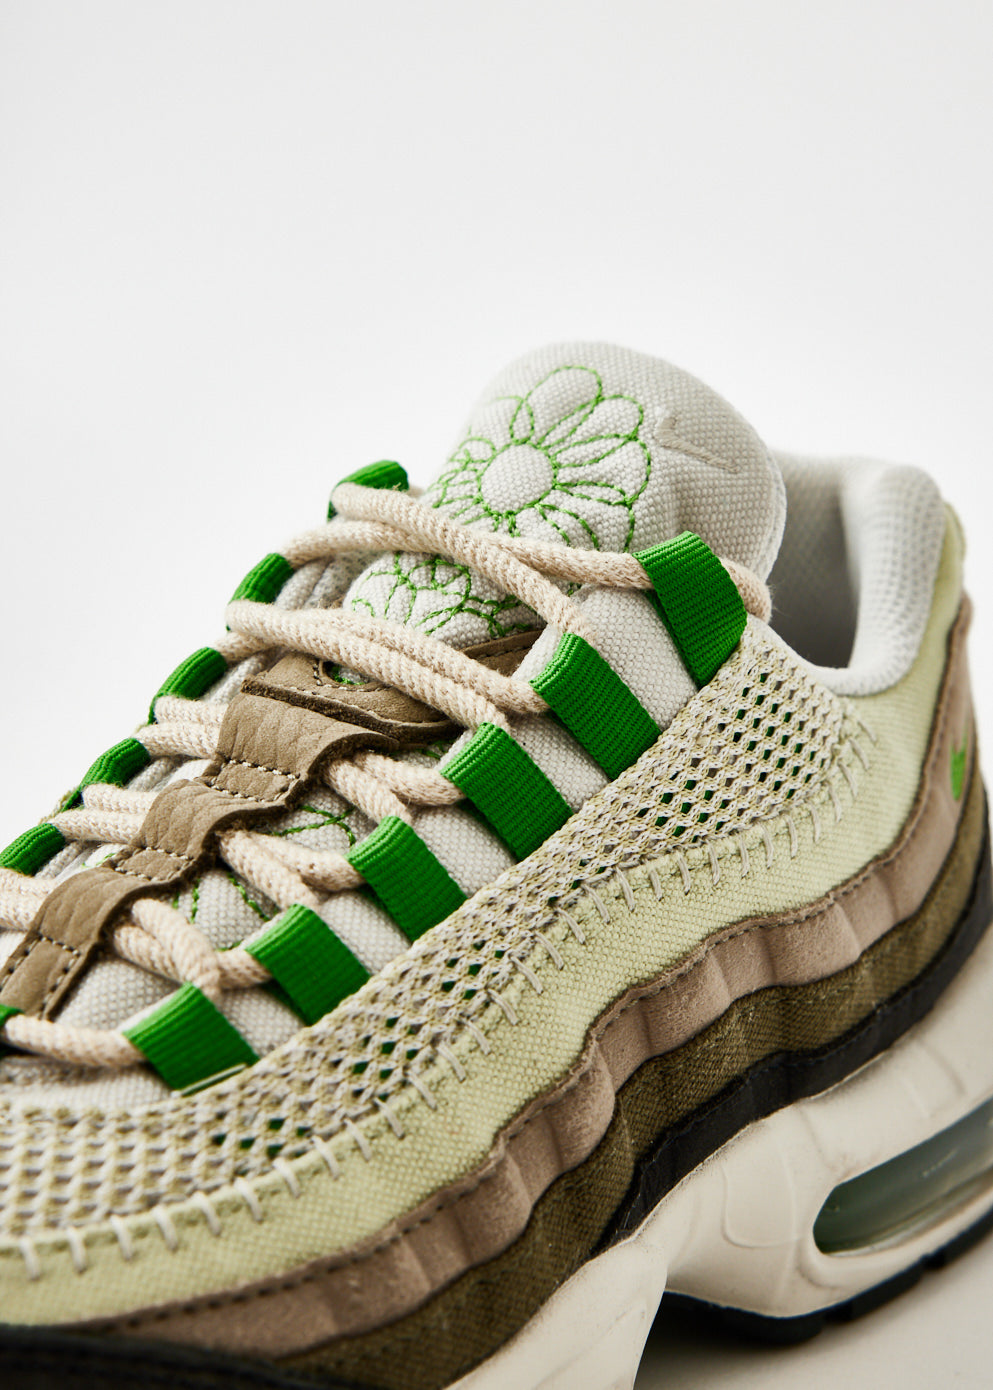 Nike Air Max 95 'Earth Day' Sneakers